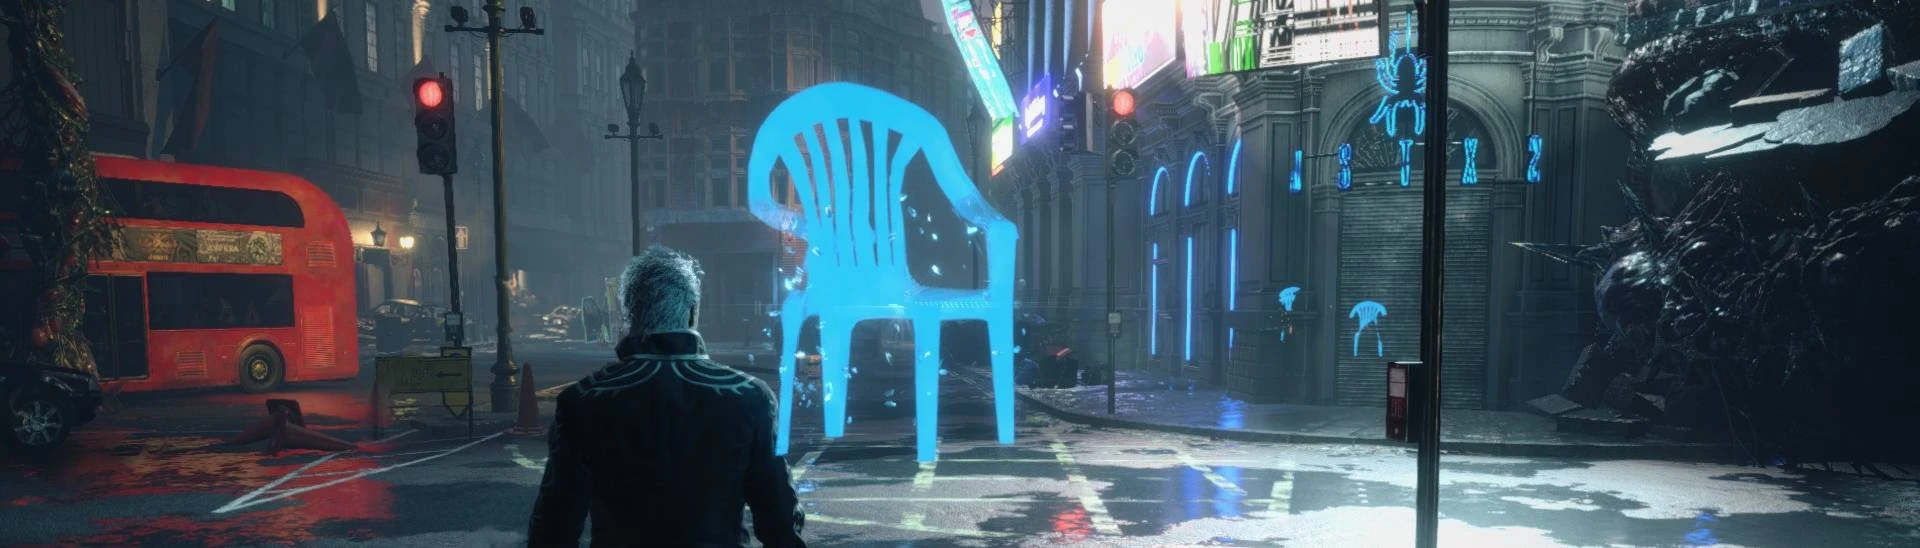 Vergil chair 2.0 at Devil May Cry 5 Nexus - Mods and community